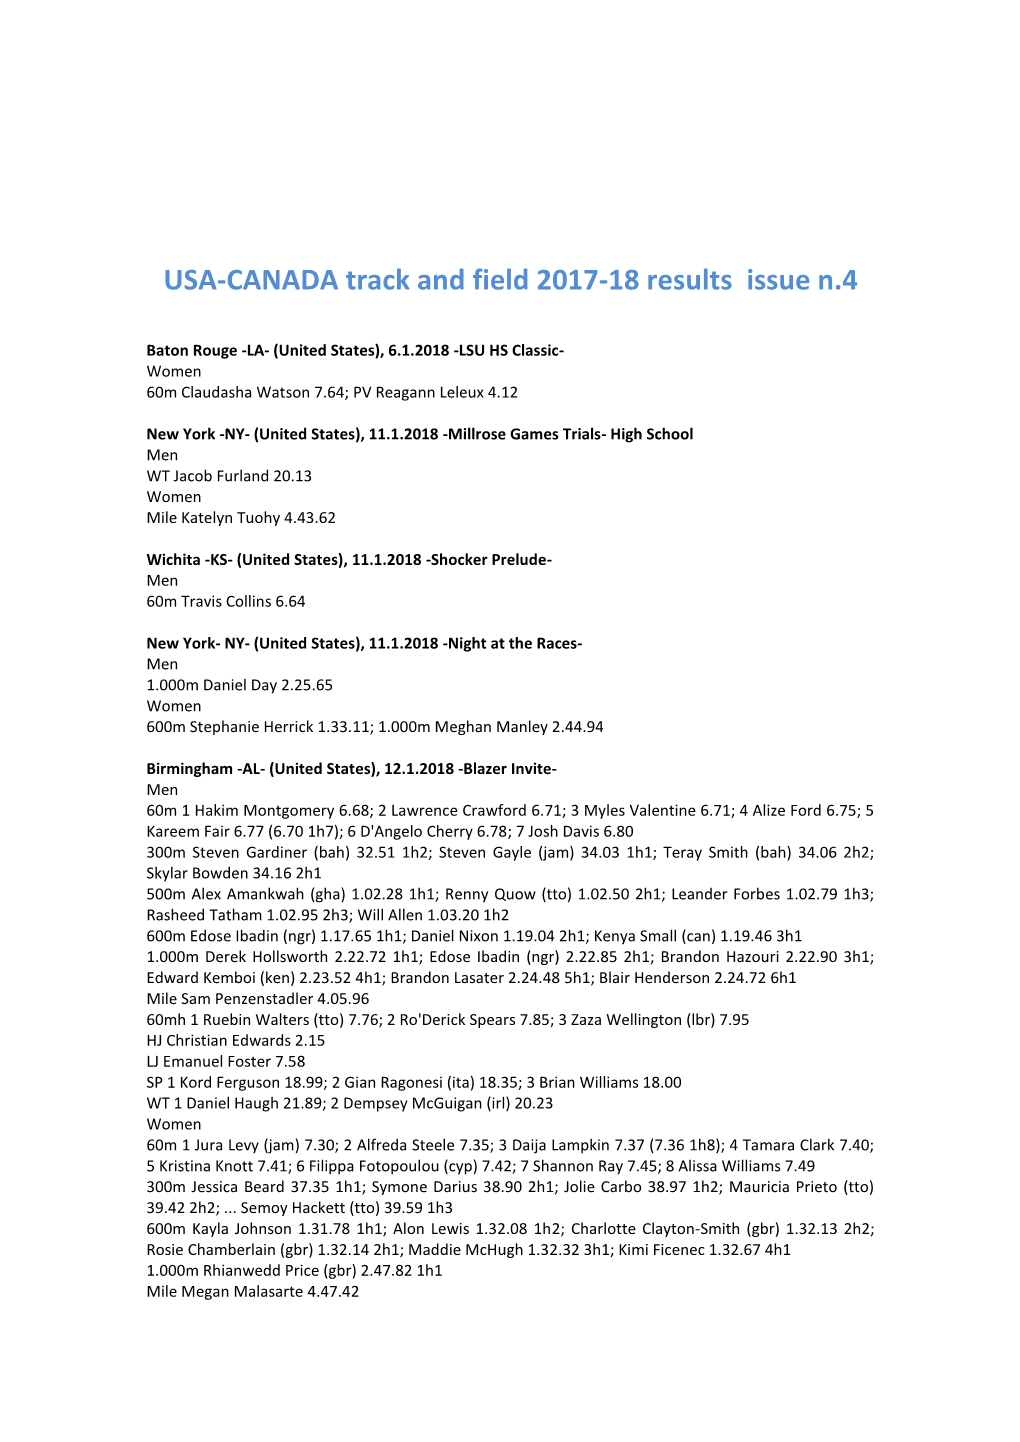 USA-CANADA Track and Field 2017-18 Results Issue N.4